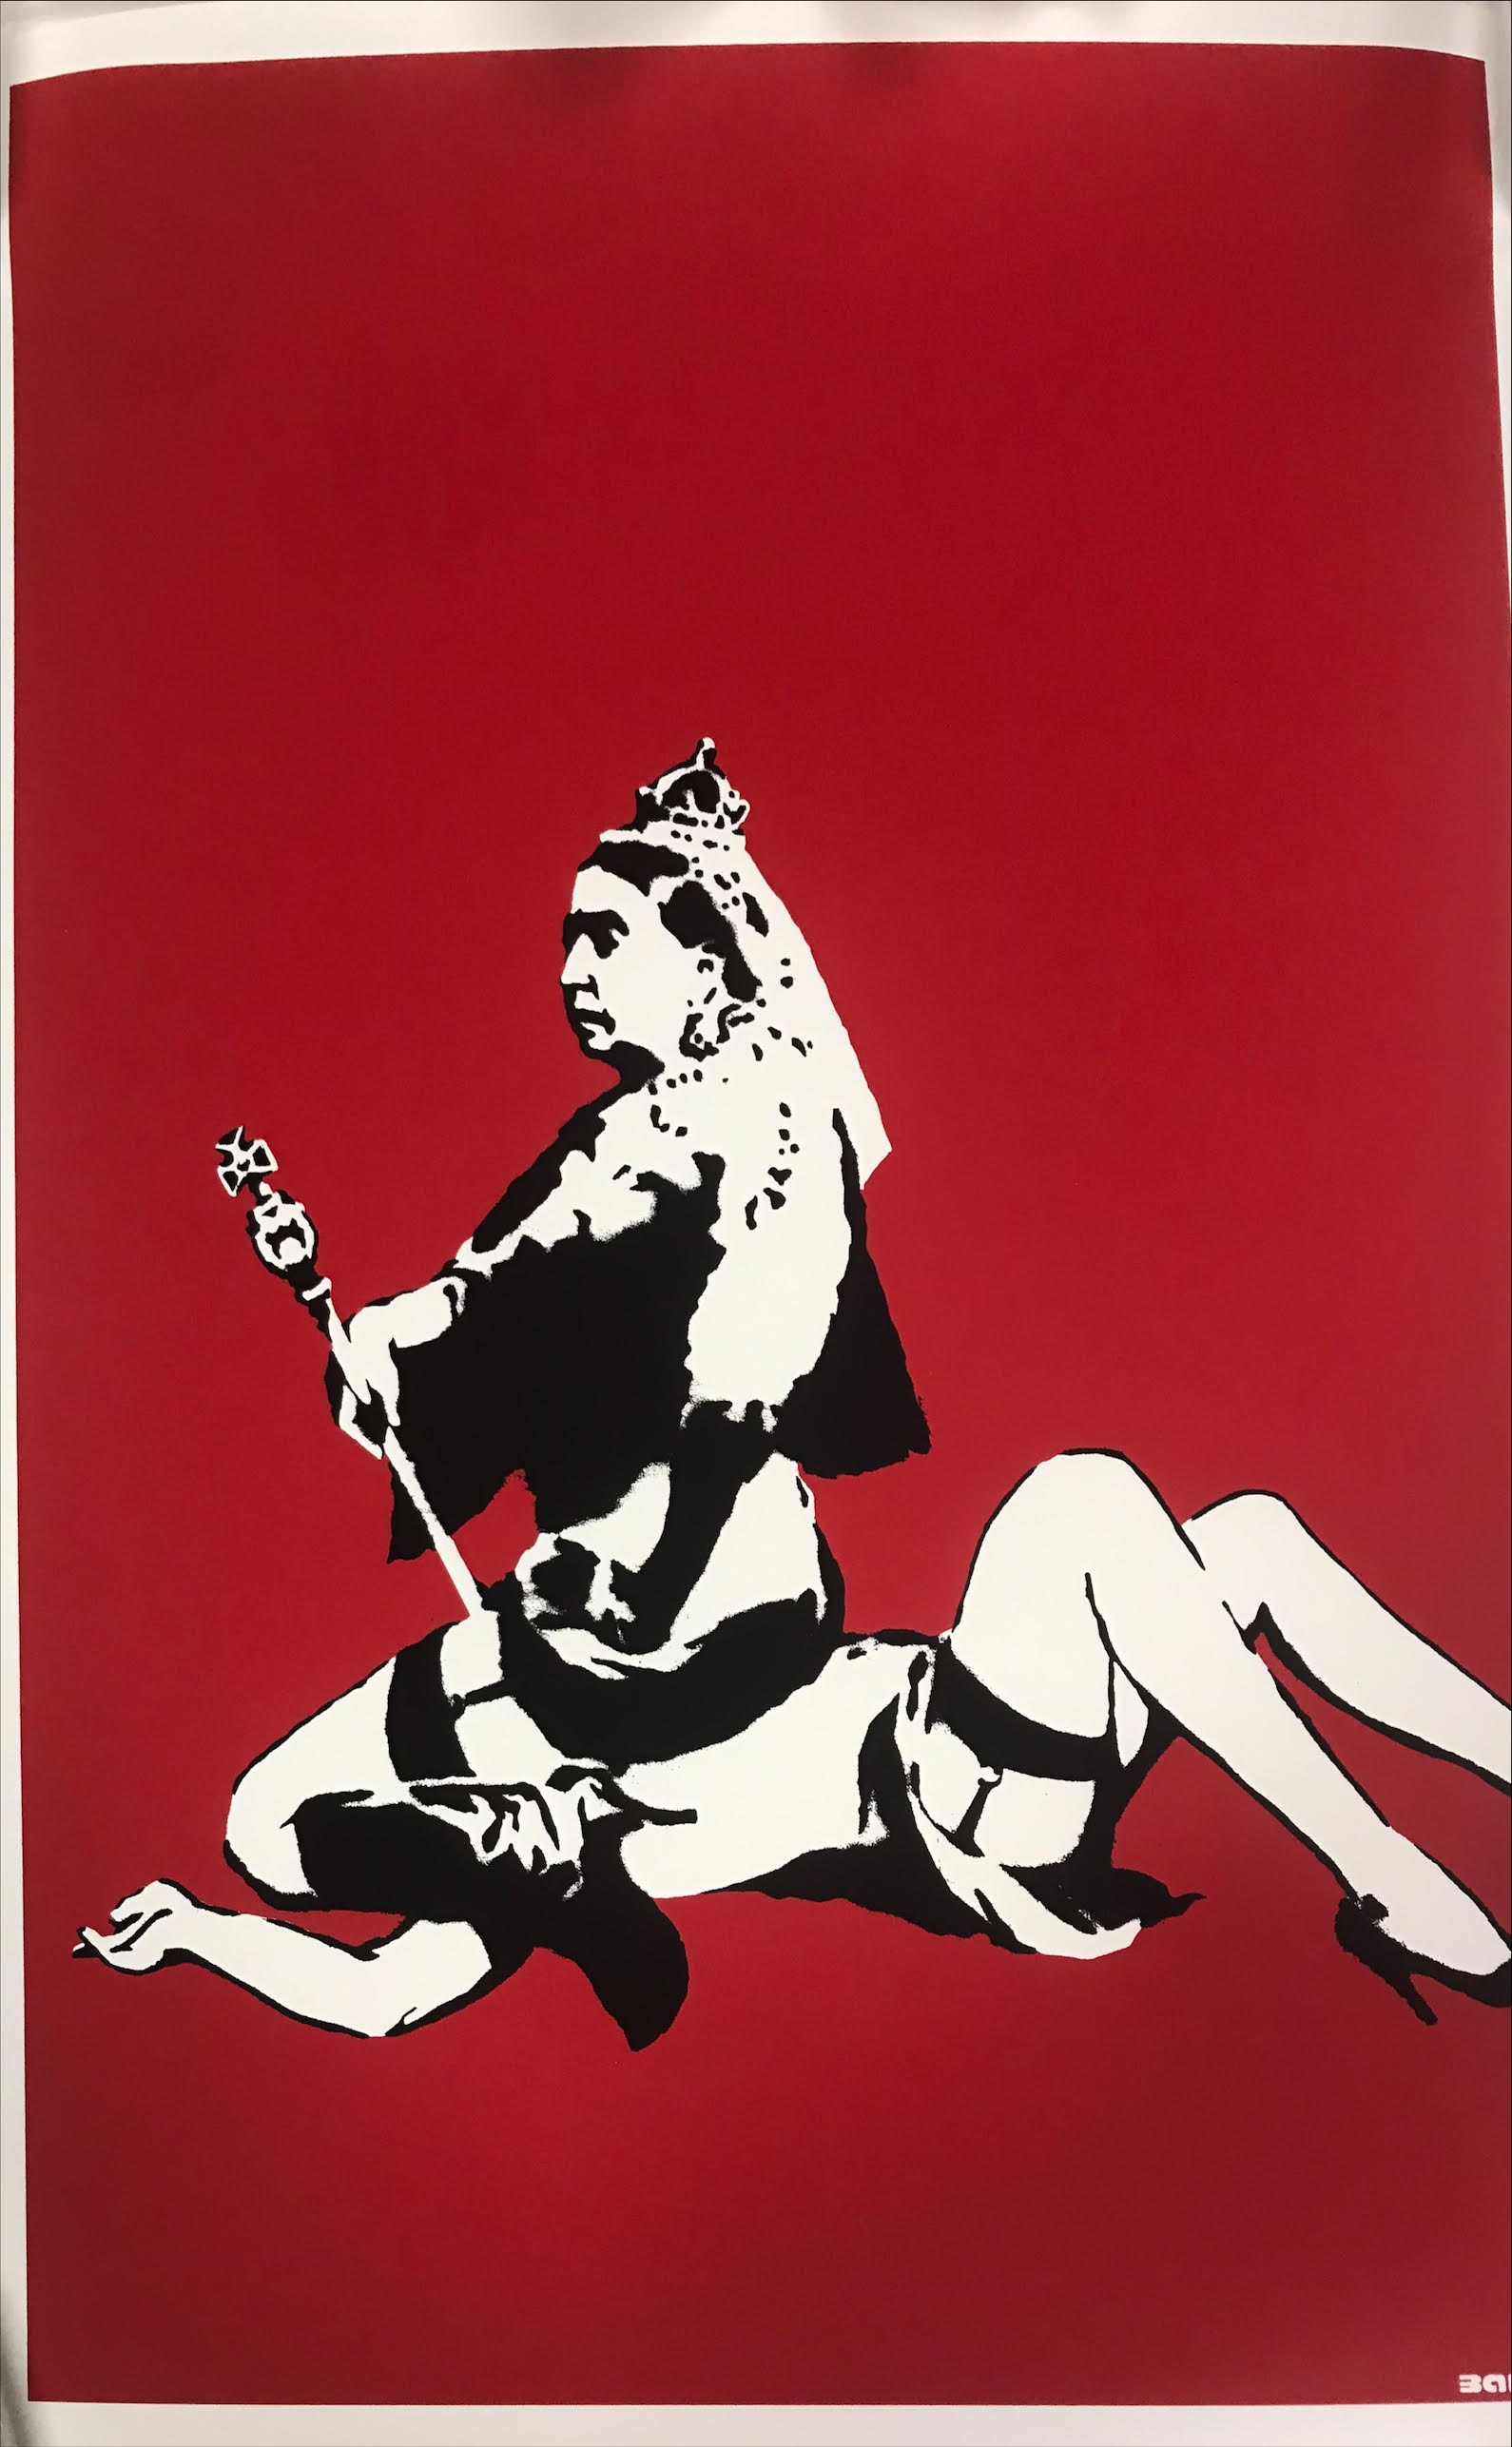 After Banksy, limited edition print by West Country Prince. Victoria